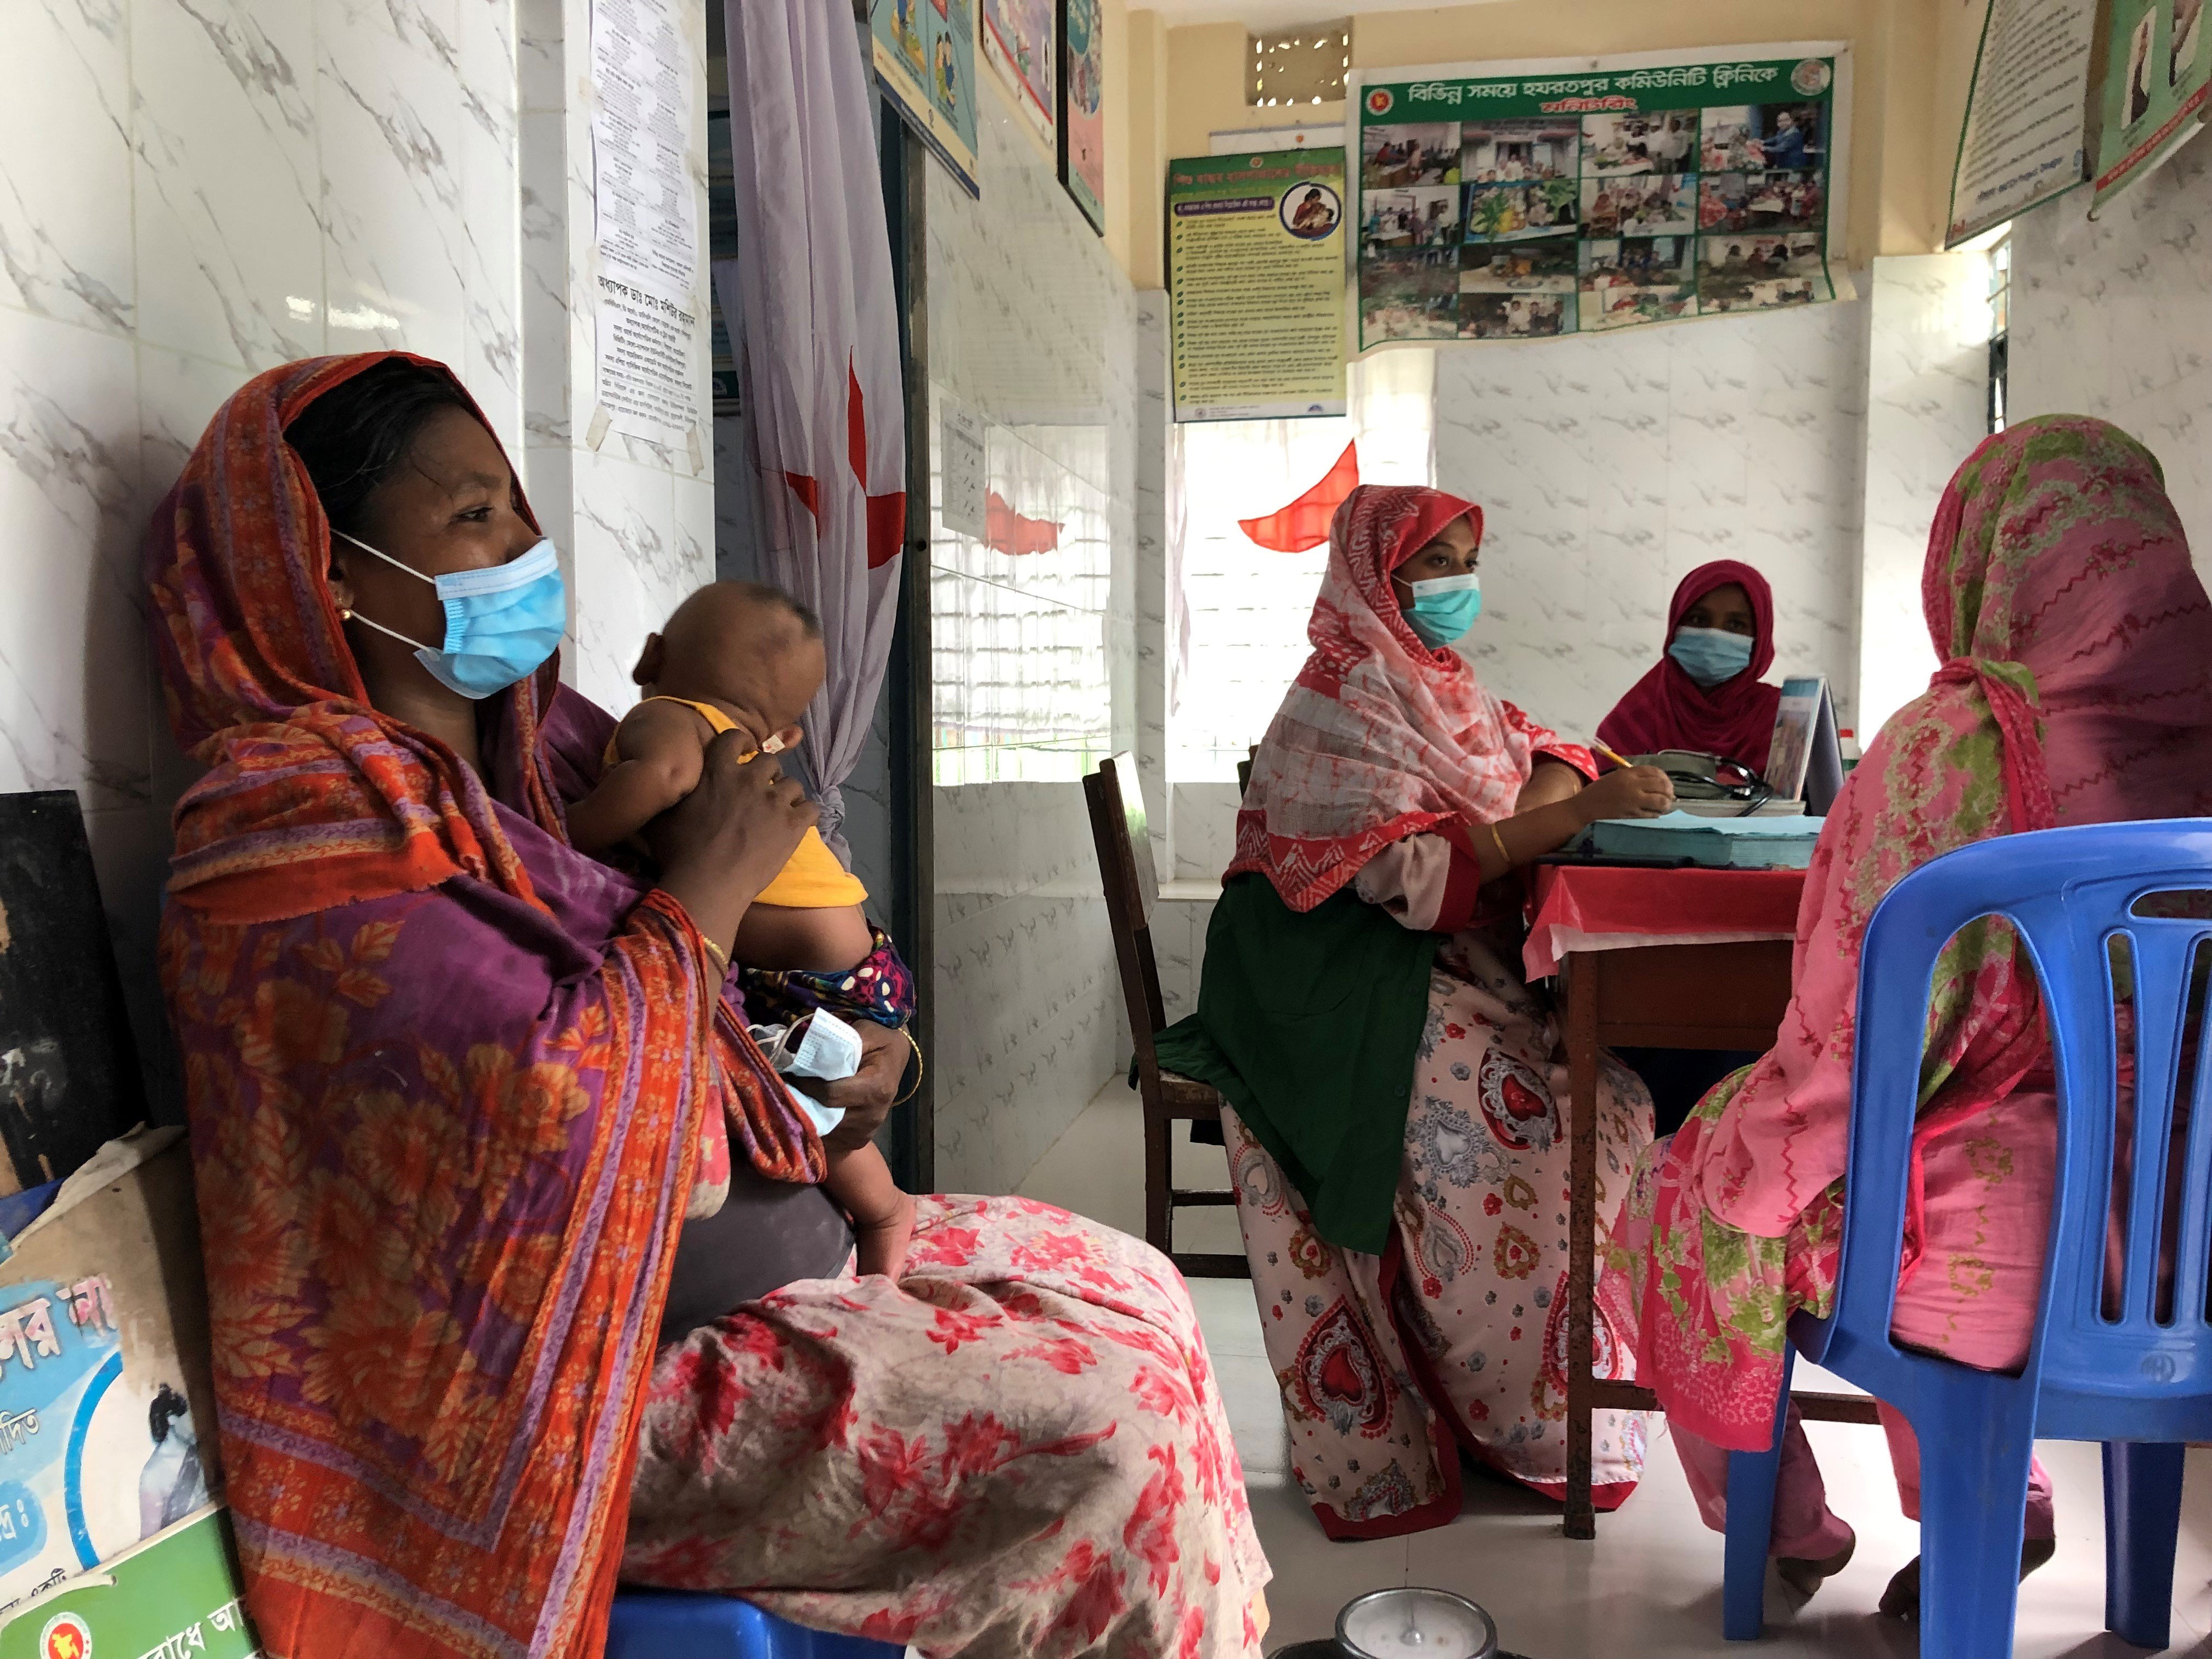 Bangladesh: Community health workers at the heart of a stronger health system and the fight against COVID-19